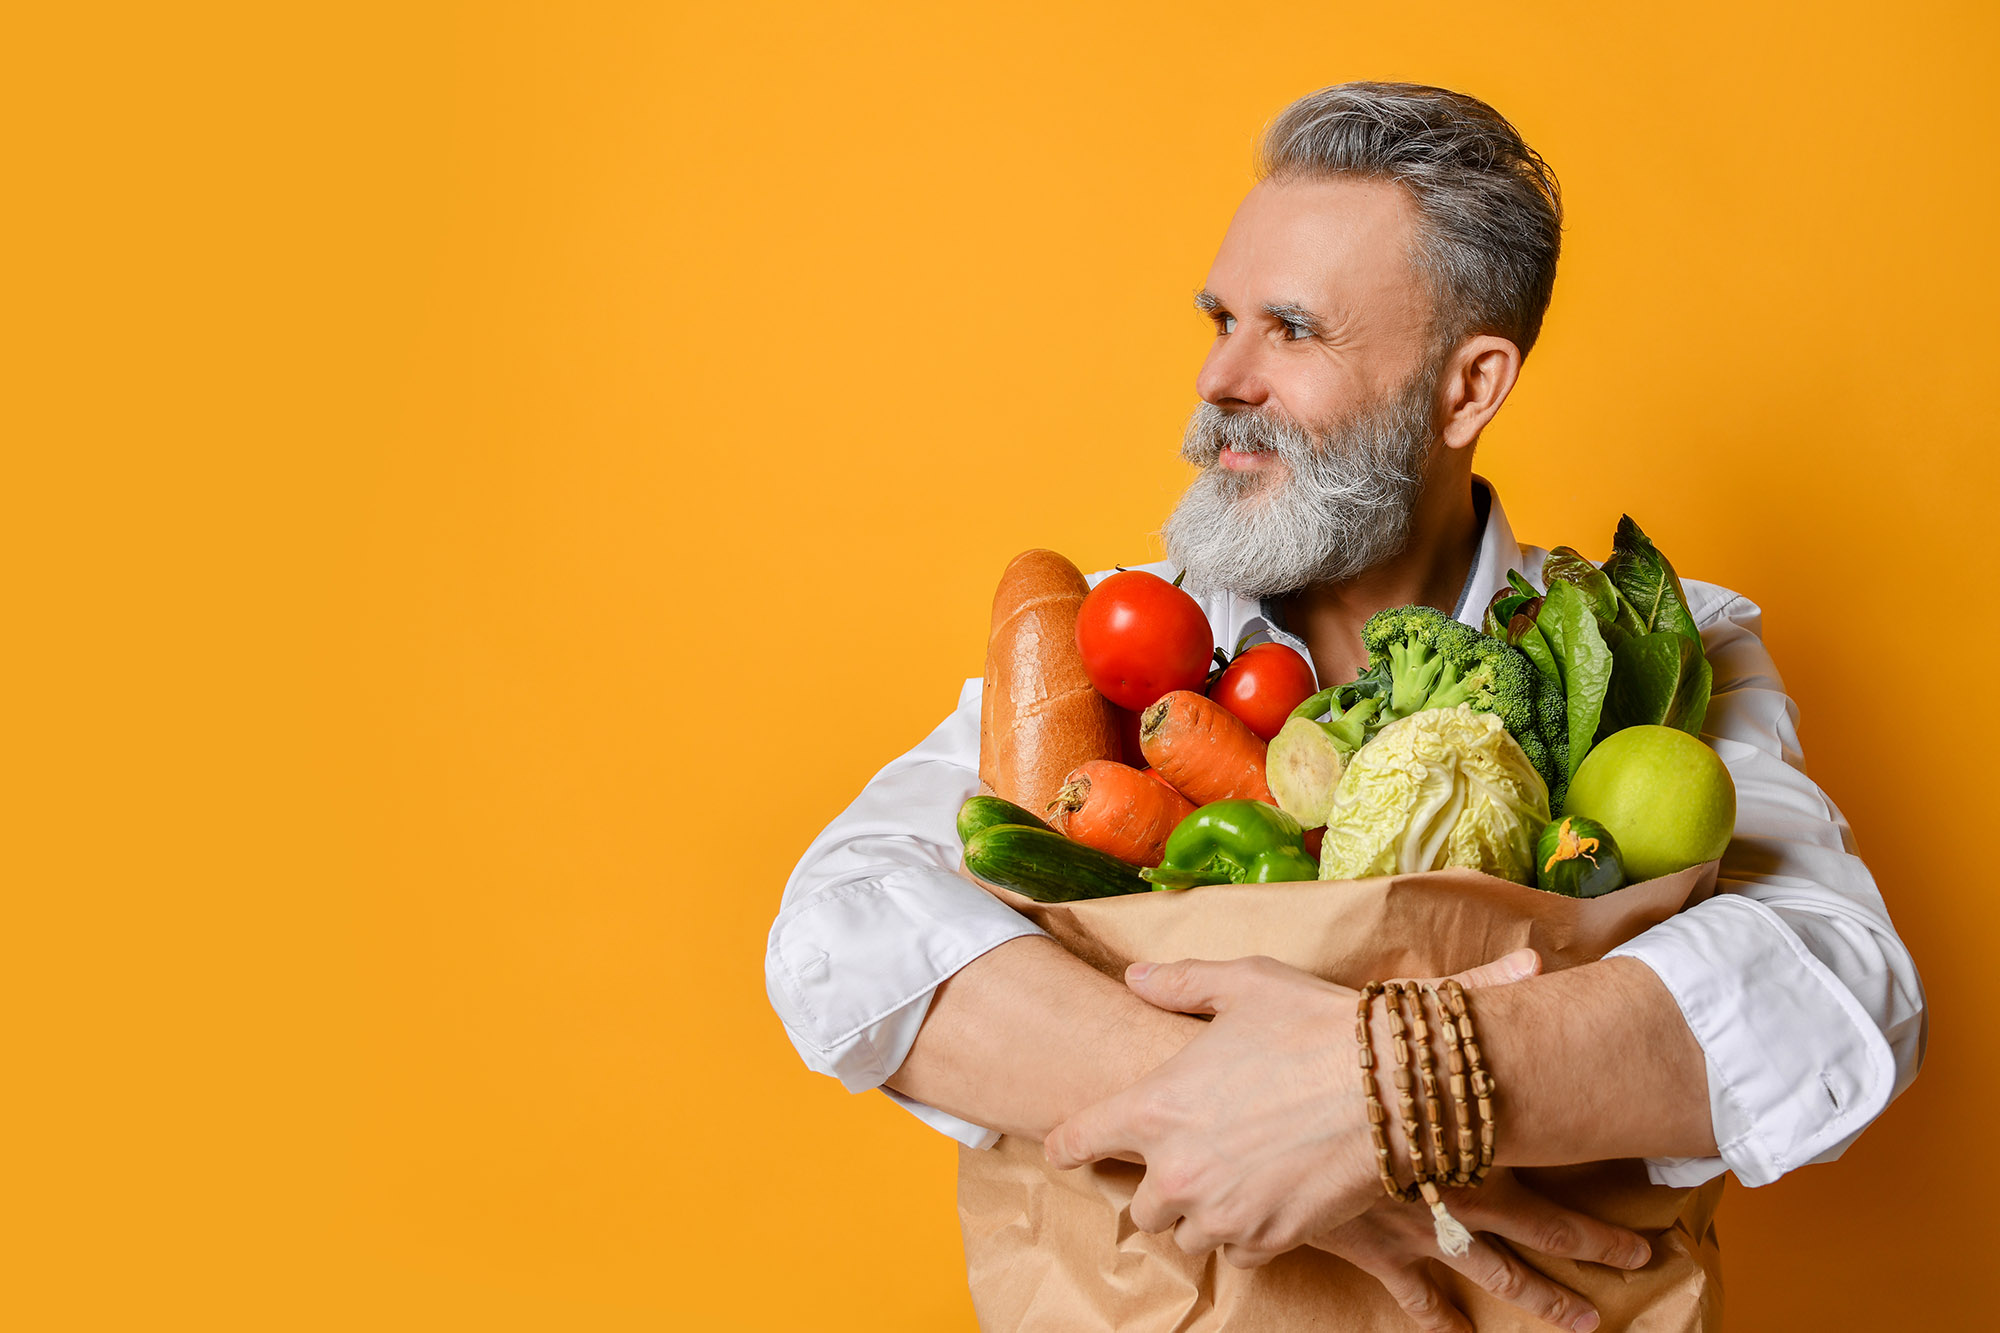 Phone conversation. Positive senior aged man holding groceries on a yellow background